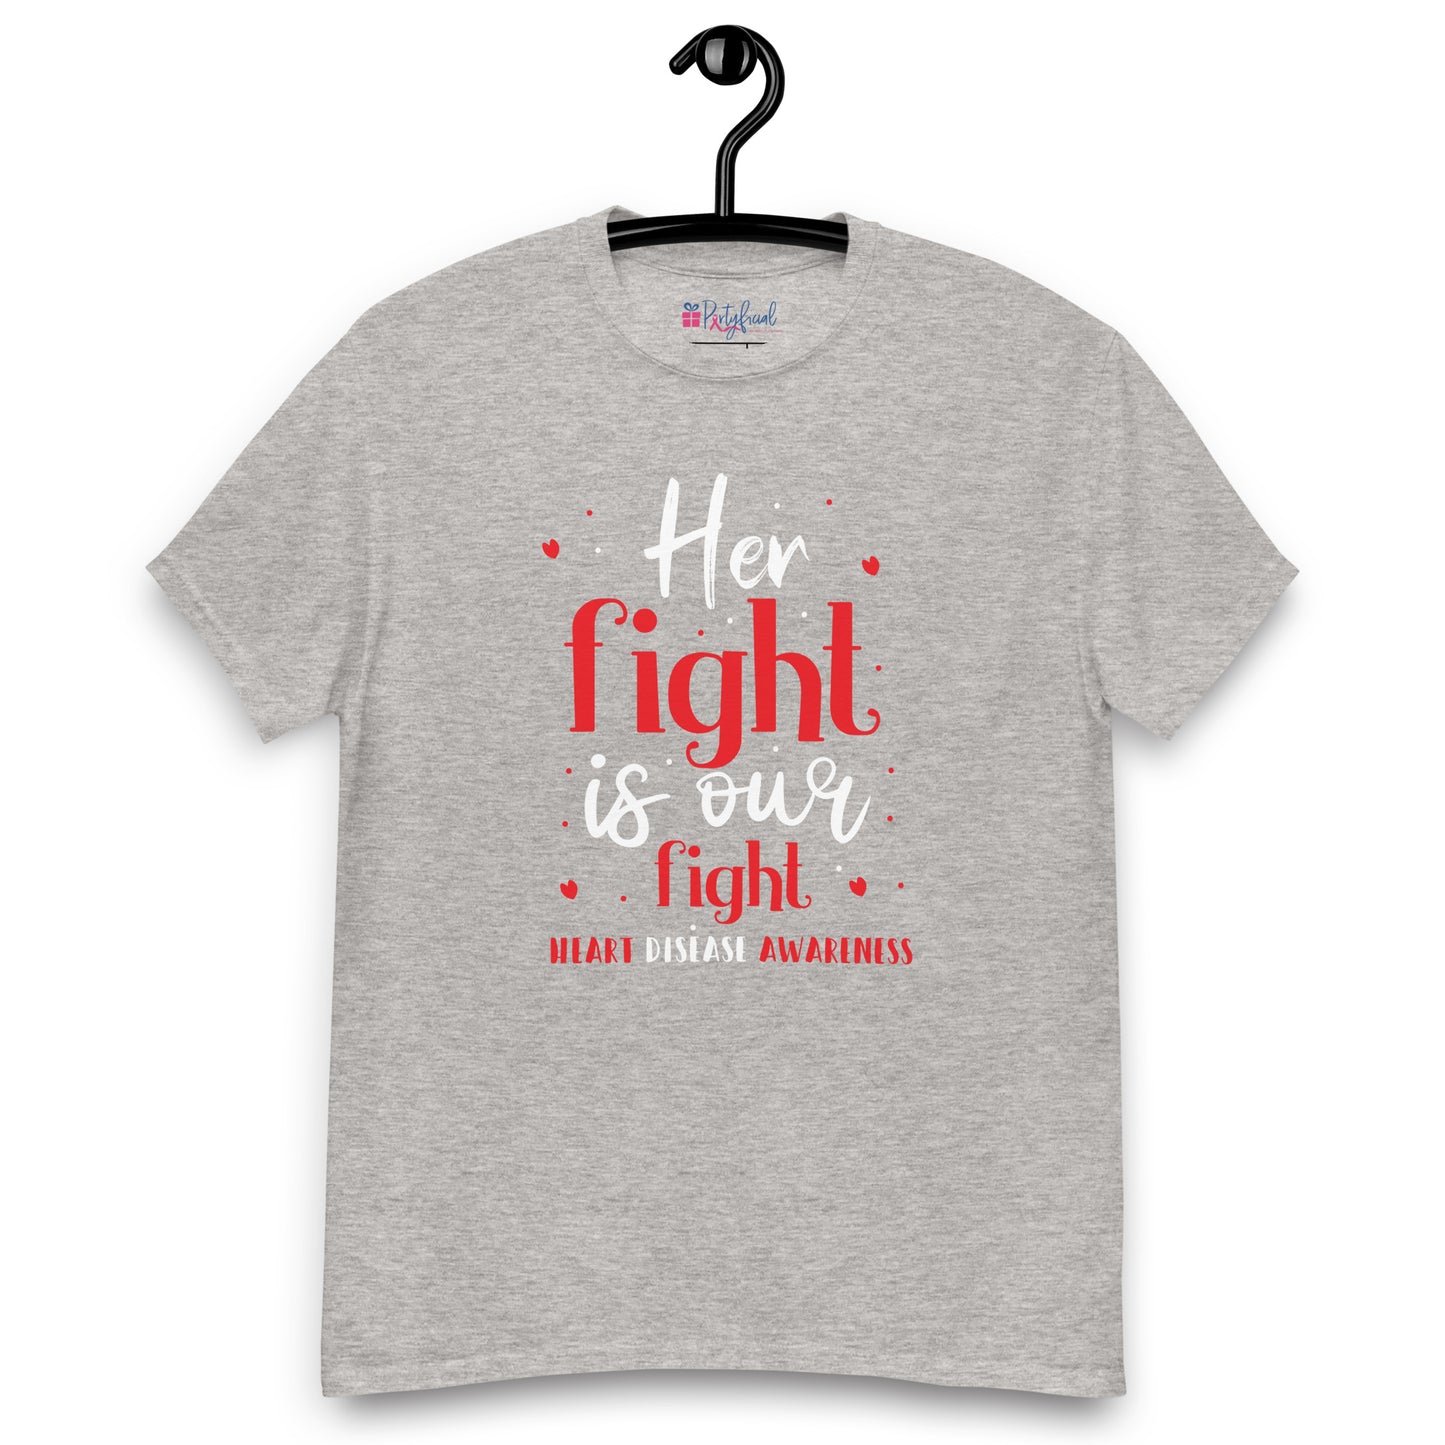 Her Fight is our Fight tee